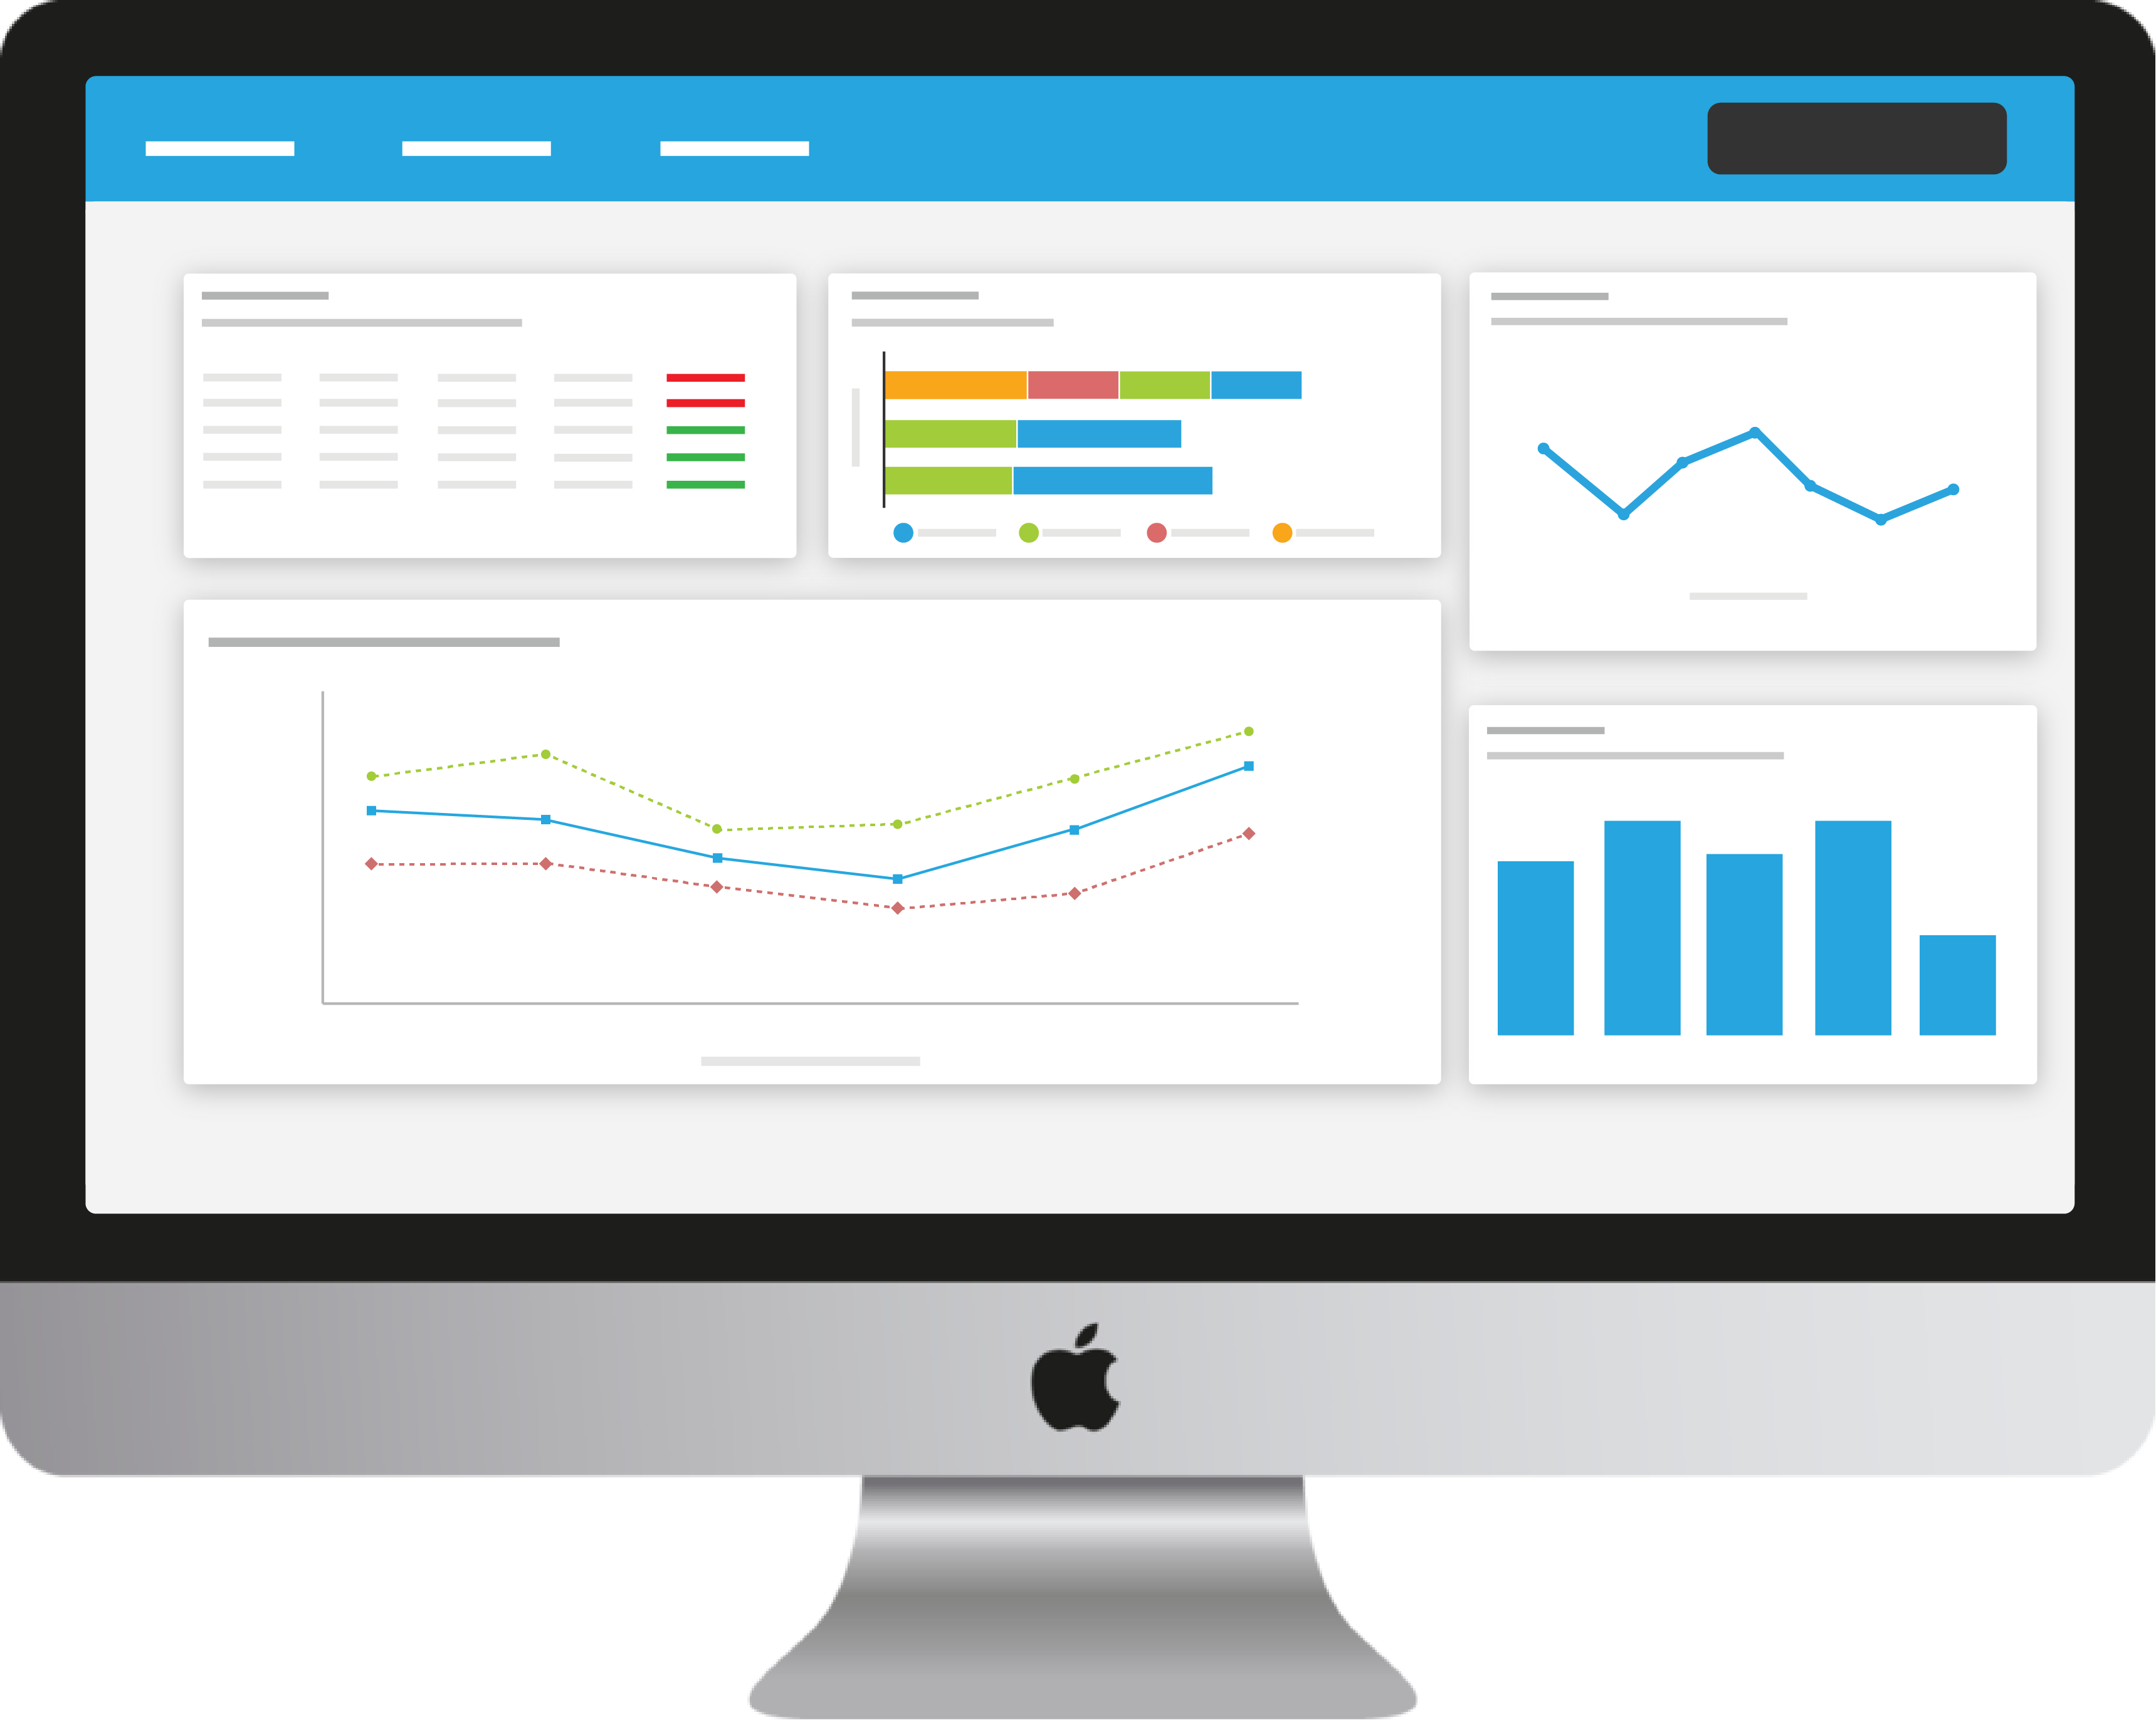 Provide low-touch Dashboards for greater insights into business KPI’s